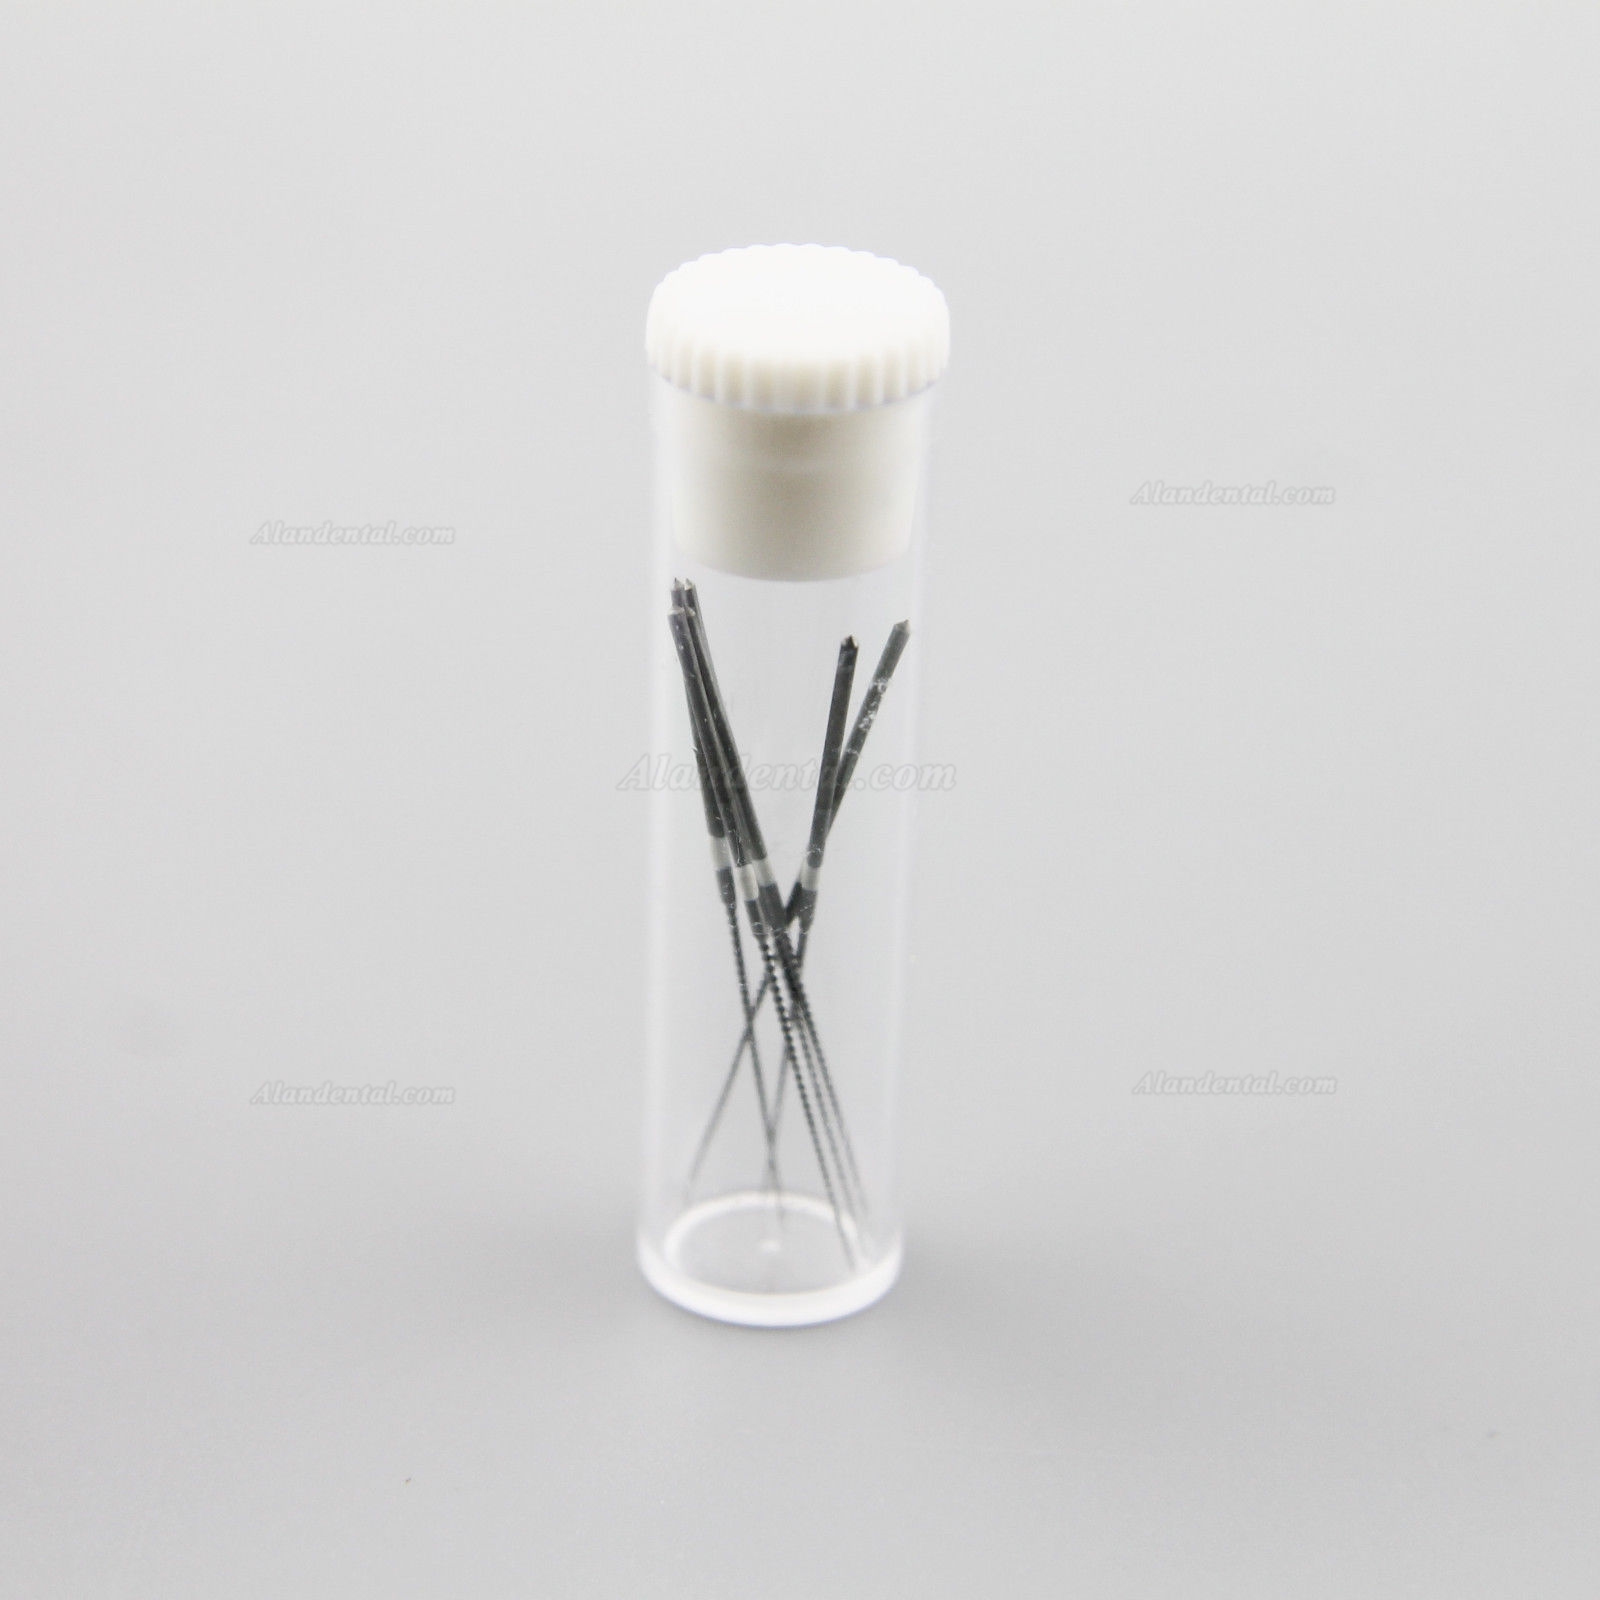 6 Bottles Woodpecker Niti Endodontic Files U file for Root Canal Cleaning #15-40